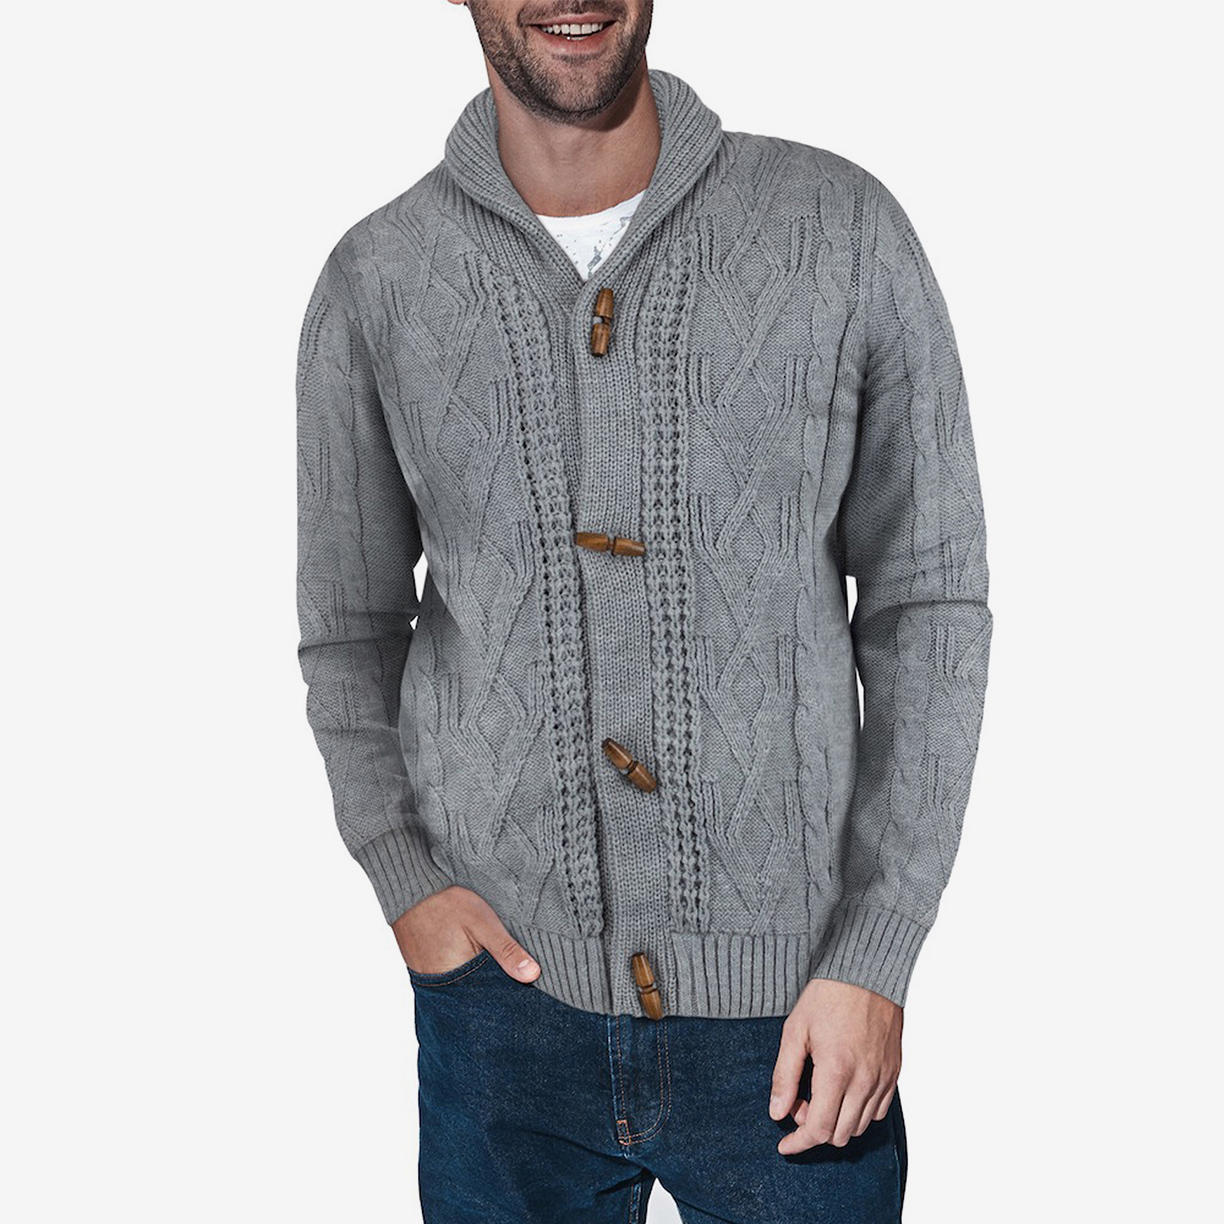 Men's Fall-Ready Sweaters & More Up to 60% Off